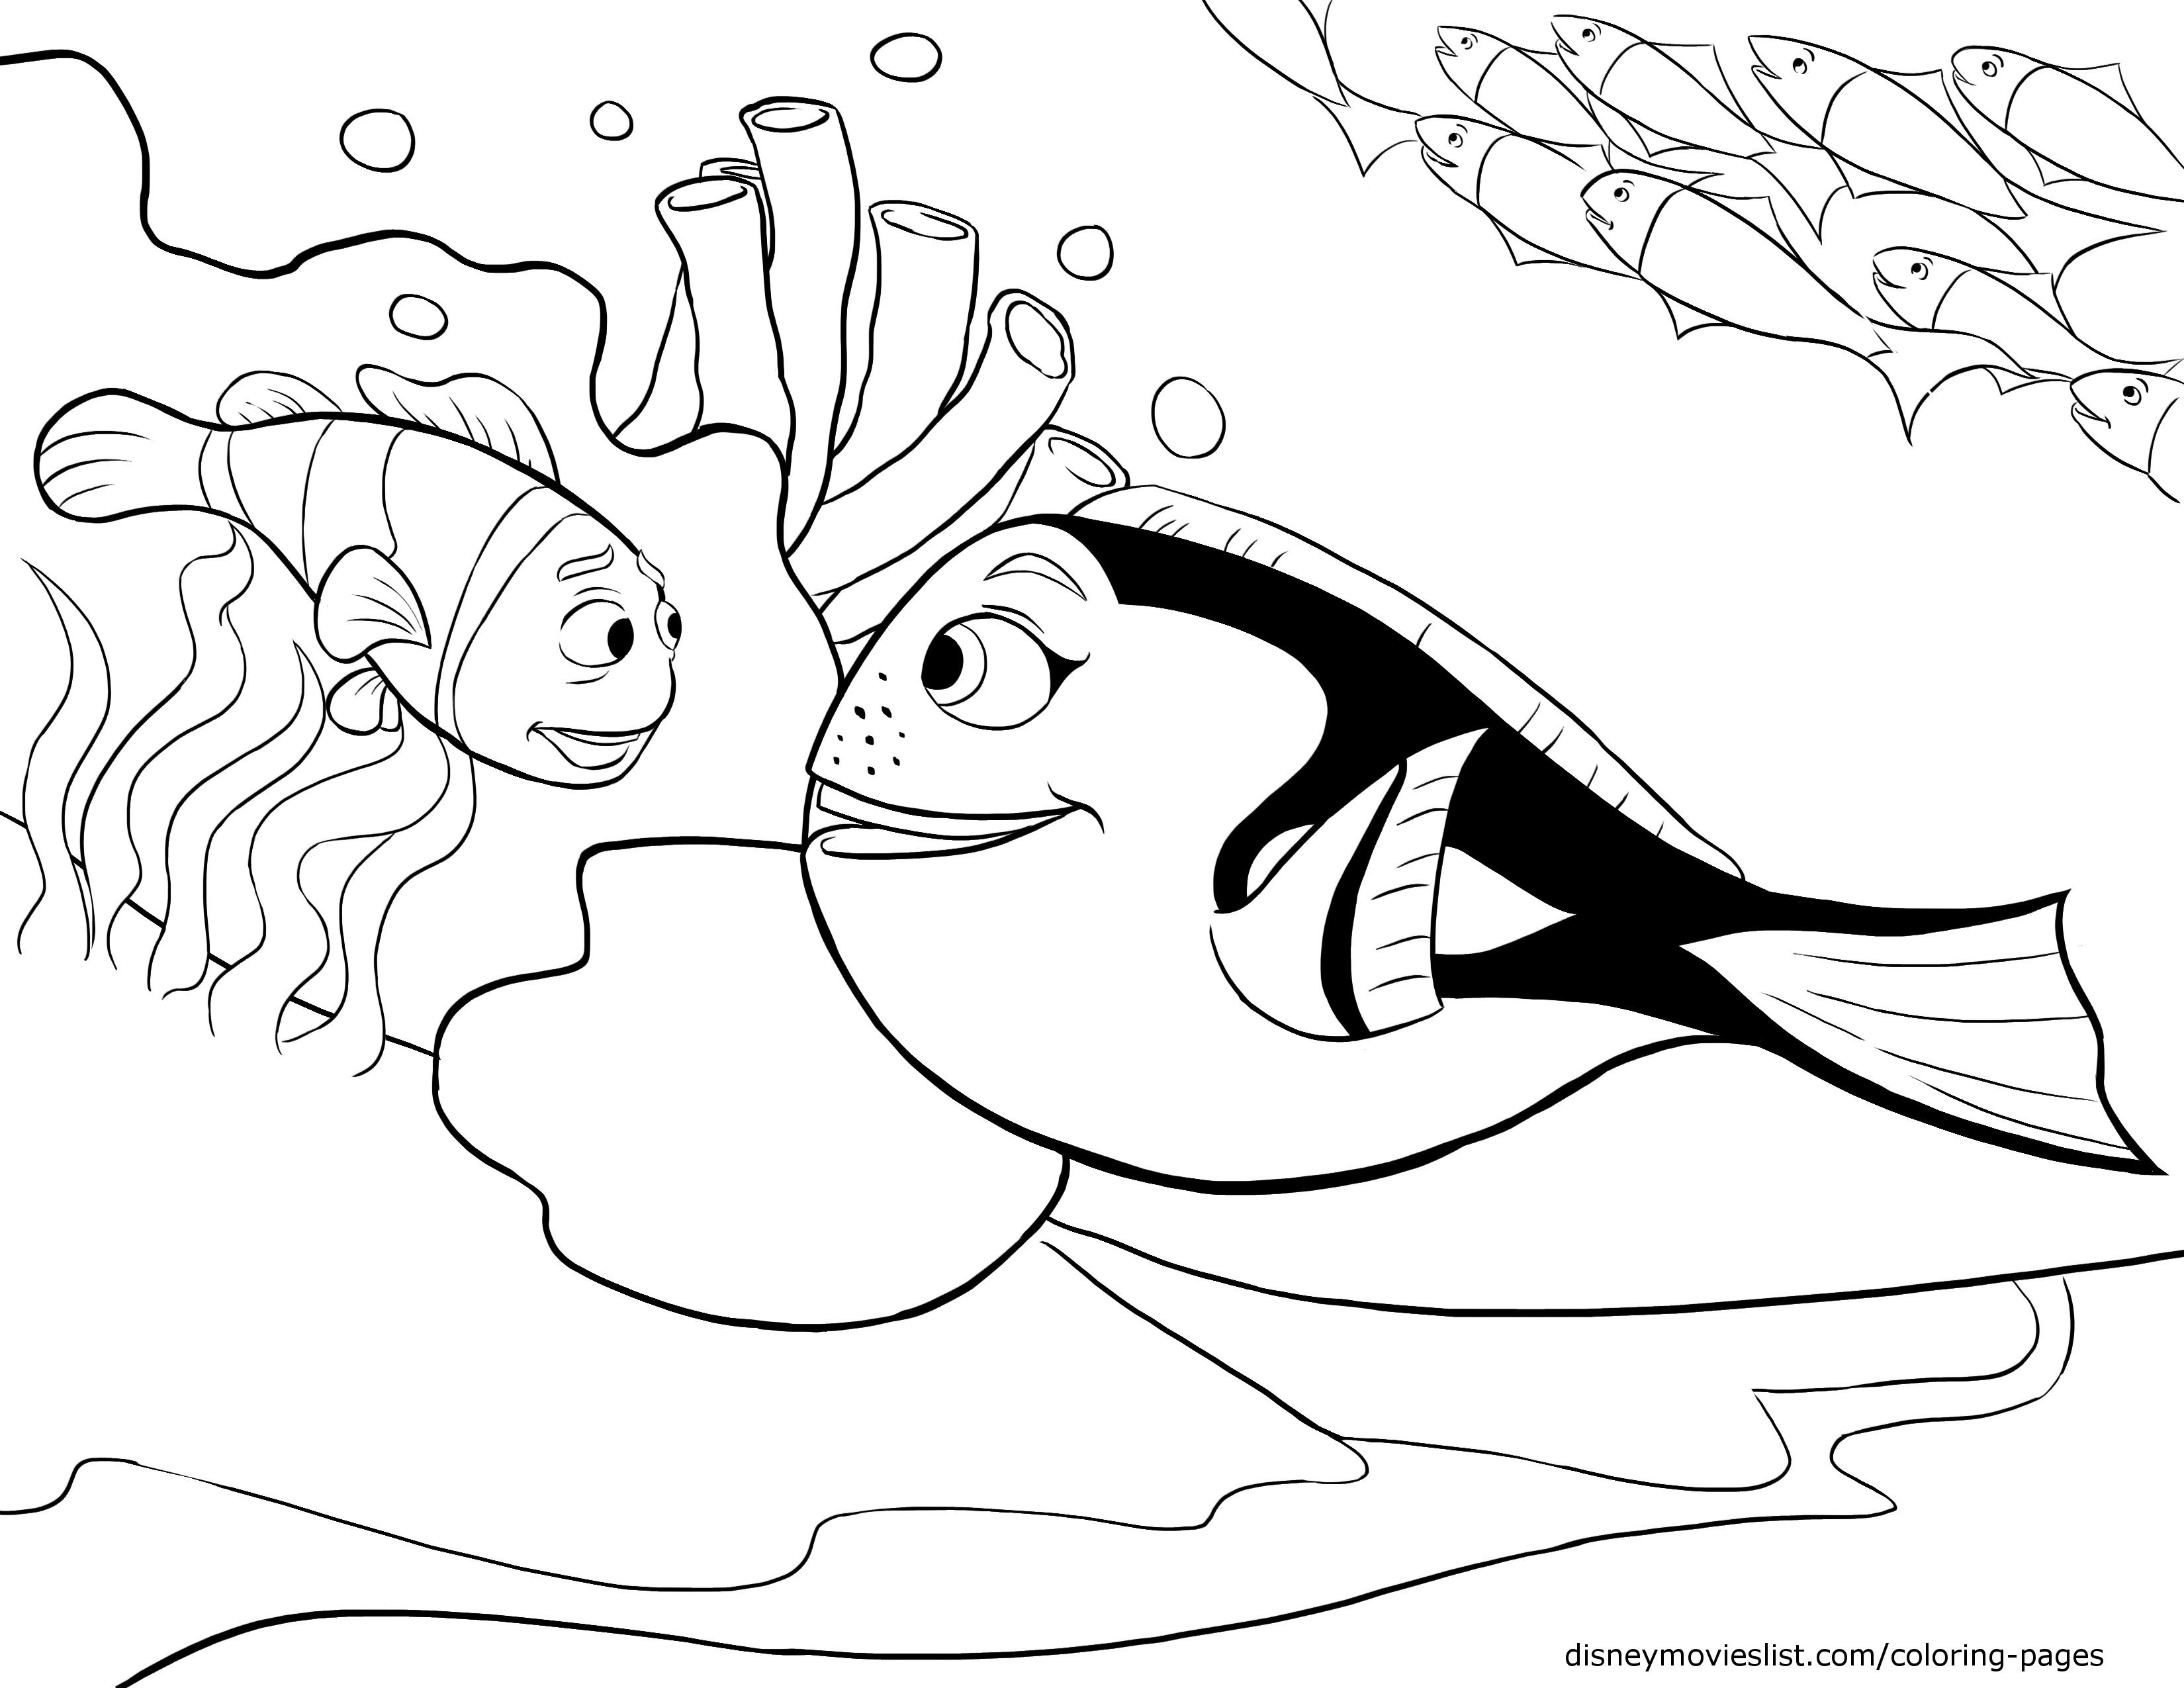 Finding Nemo Characters Coloring Pages Finding Nemo Coloring Pages At Getdrawings Free For Personal